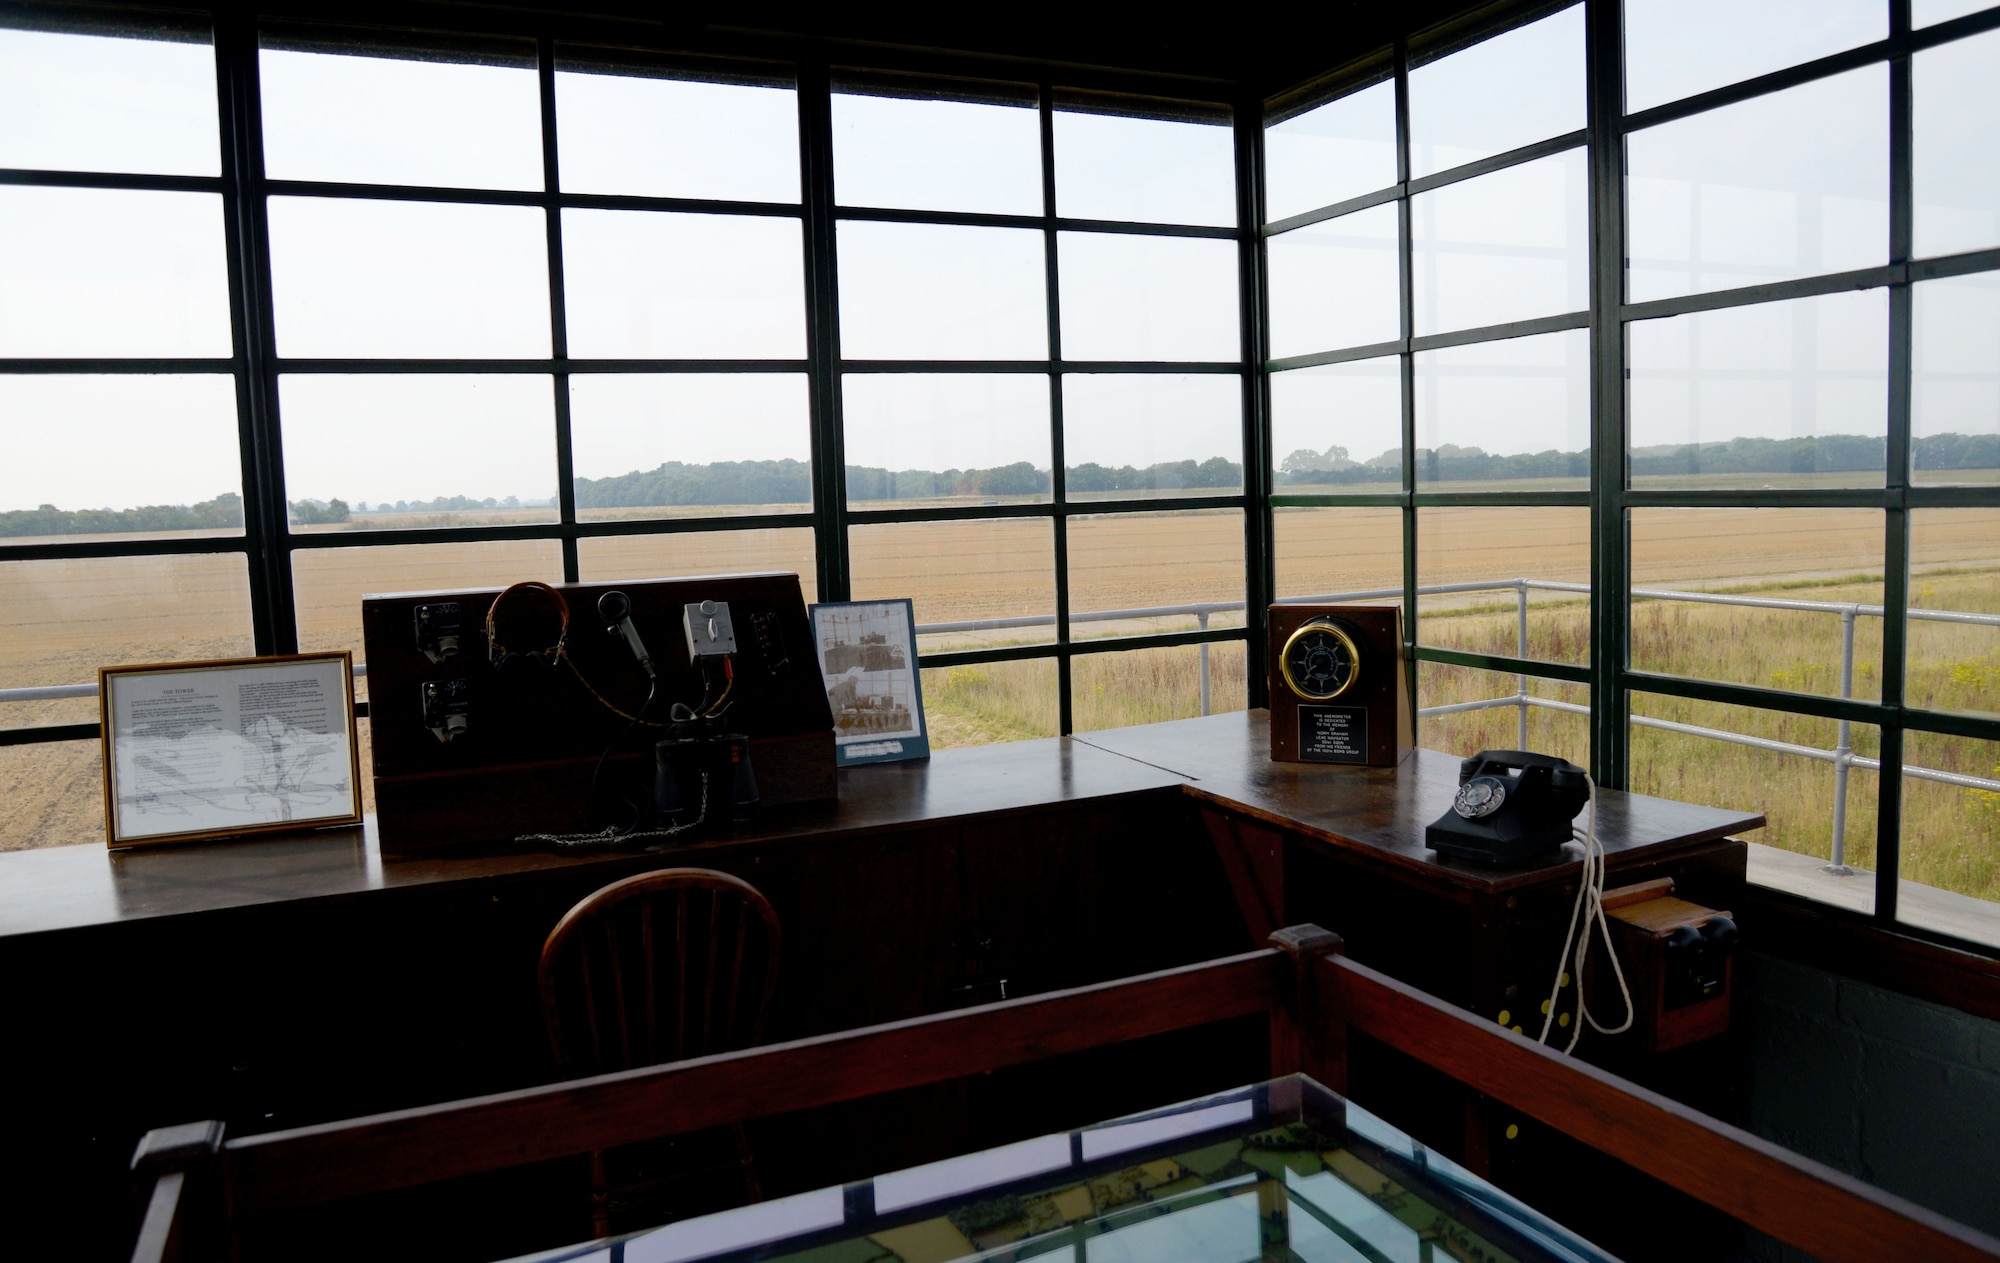 The remains of the taxiway can be seen from the top of the air traffic control tower at the 100th Bomb Group Memorial in Thorpe Abbotts, England. The tower was reconstructed to honor the squadrons and units which served from that airfield between 1943 to 1945. During World War II, the 100th BG suffered significant loss during the initial bombing missions, which earned them the nickname, the “Bloody Hundredth.” A group of volunteers, who continue to maintain the museum today, began the preservation of the site in the 1970s. (U.S. Air Force photo by Senior Airman Justine Rho)